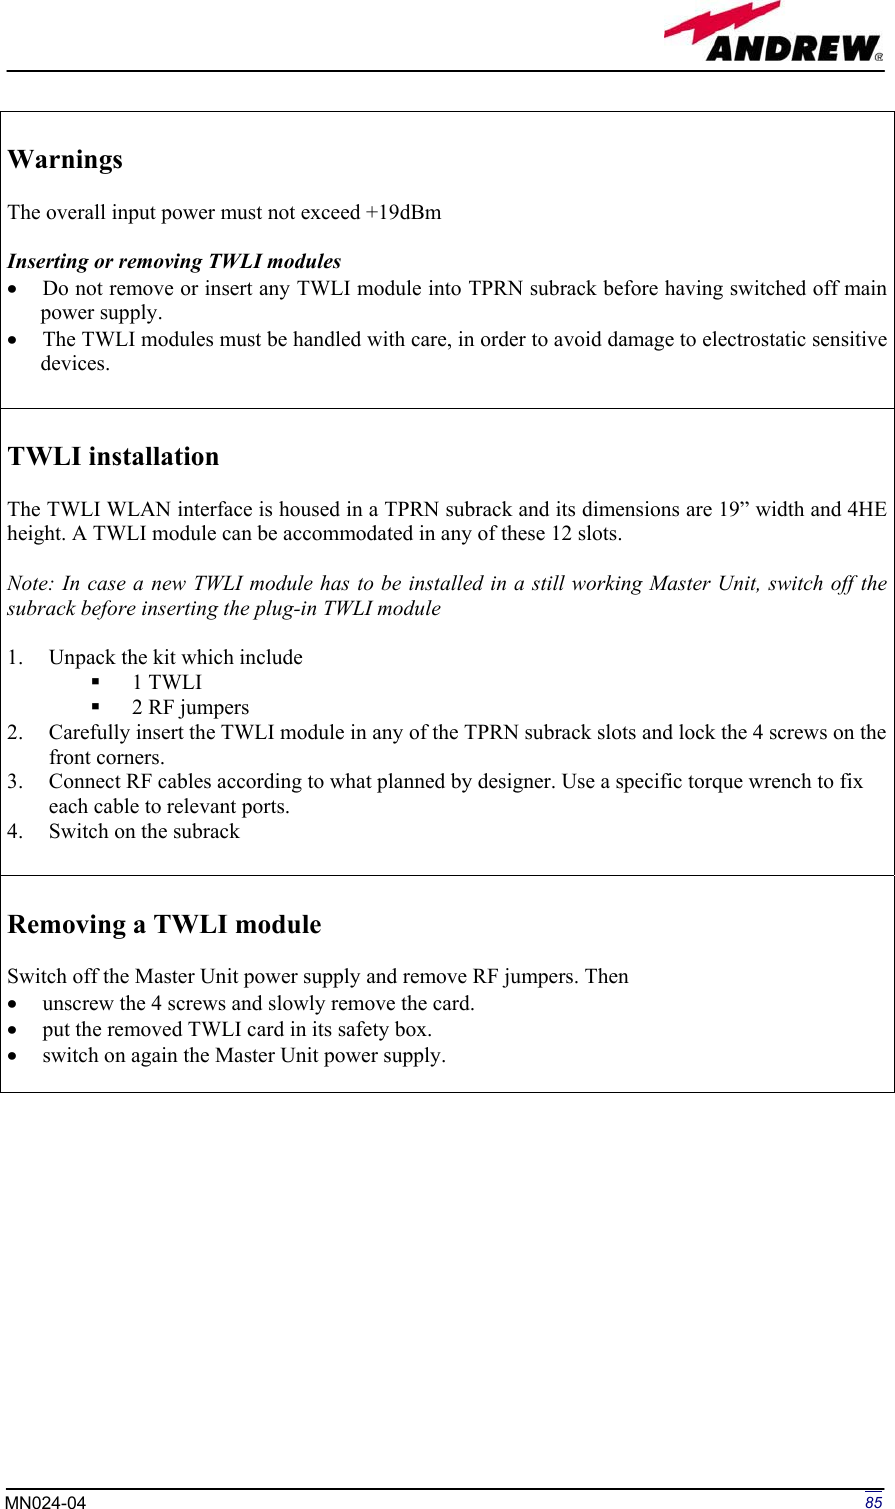 Page 85 of Andrew Wireless Innovations Group BCP-TFAM23 Model TFAM23 Downlink Booster User Manual MN024 04 rev3